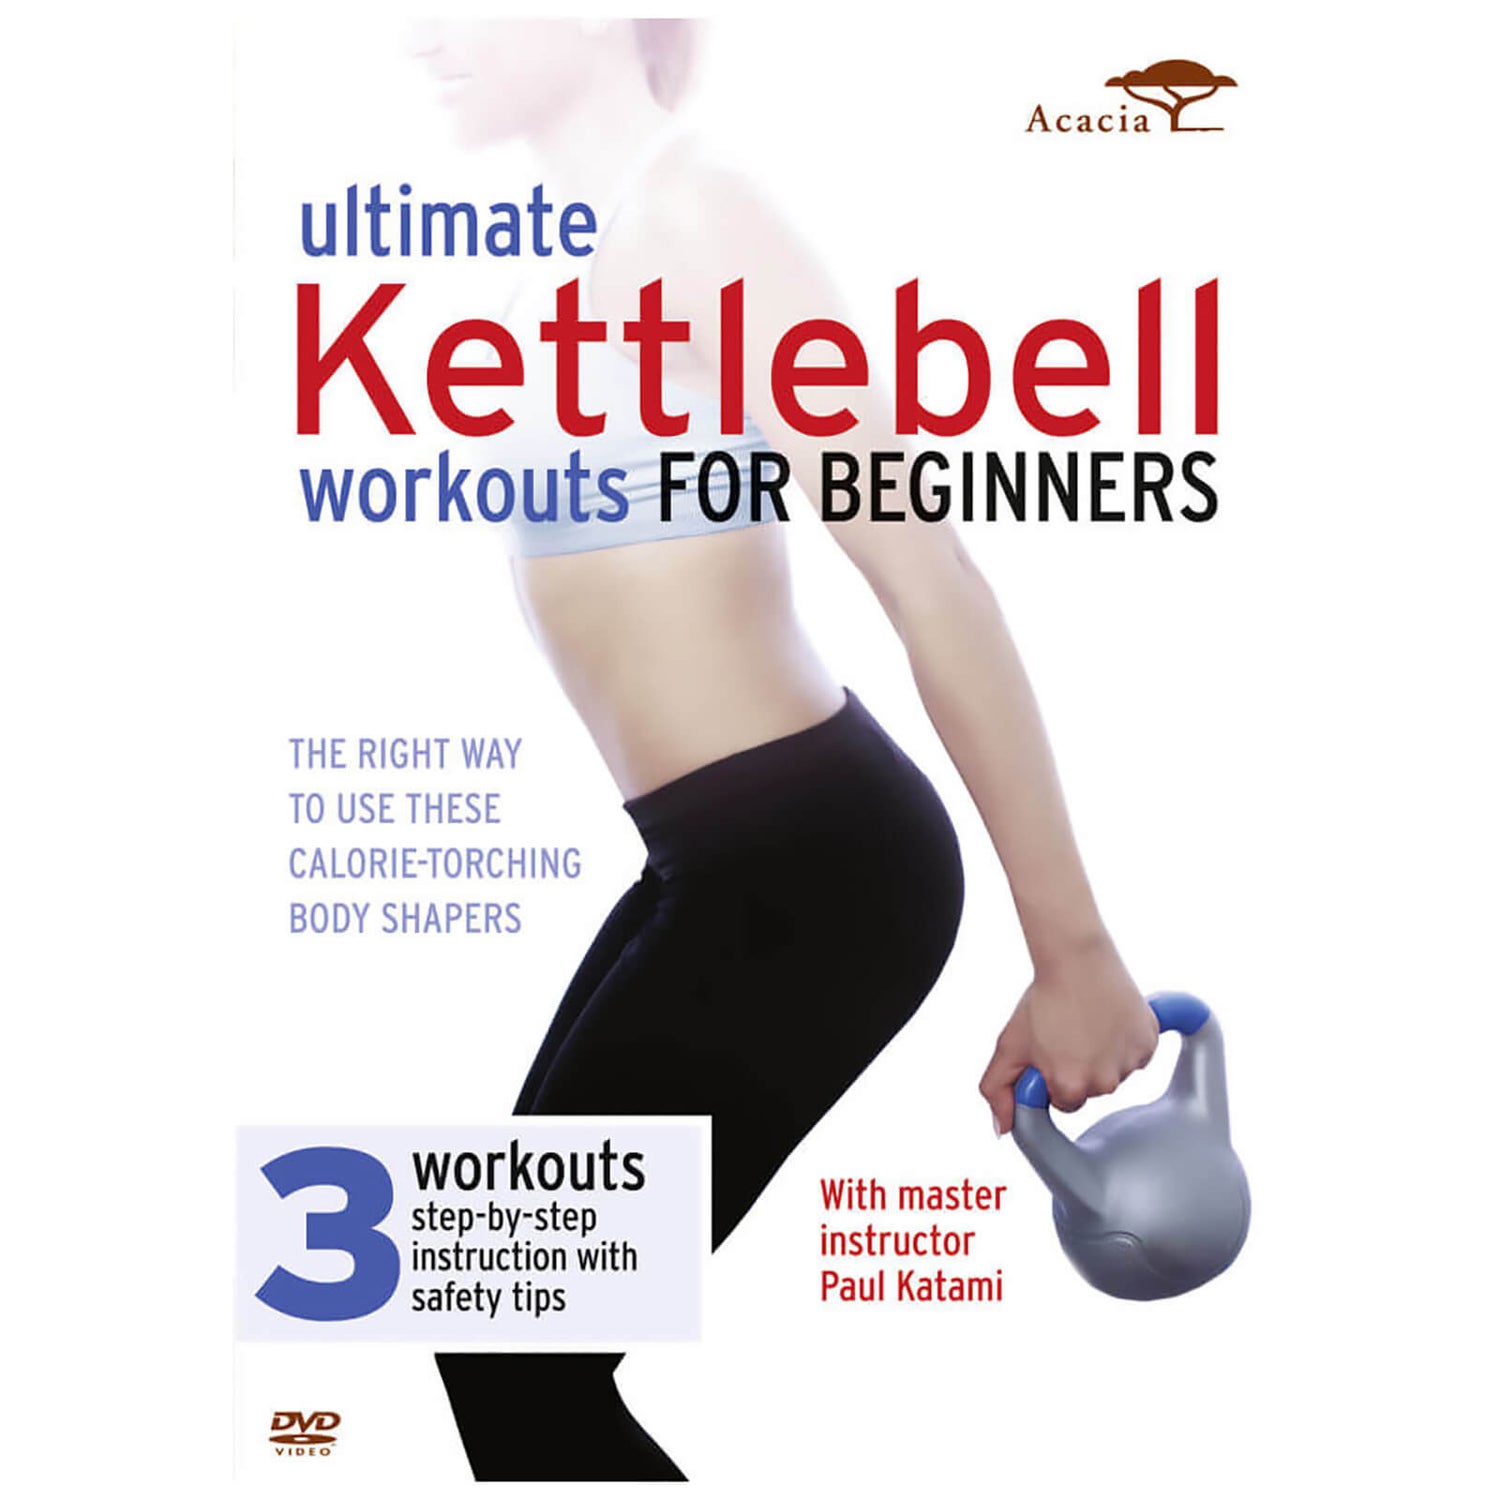 Ultimate Kettlebell Workout for Beginners